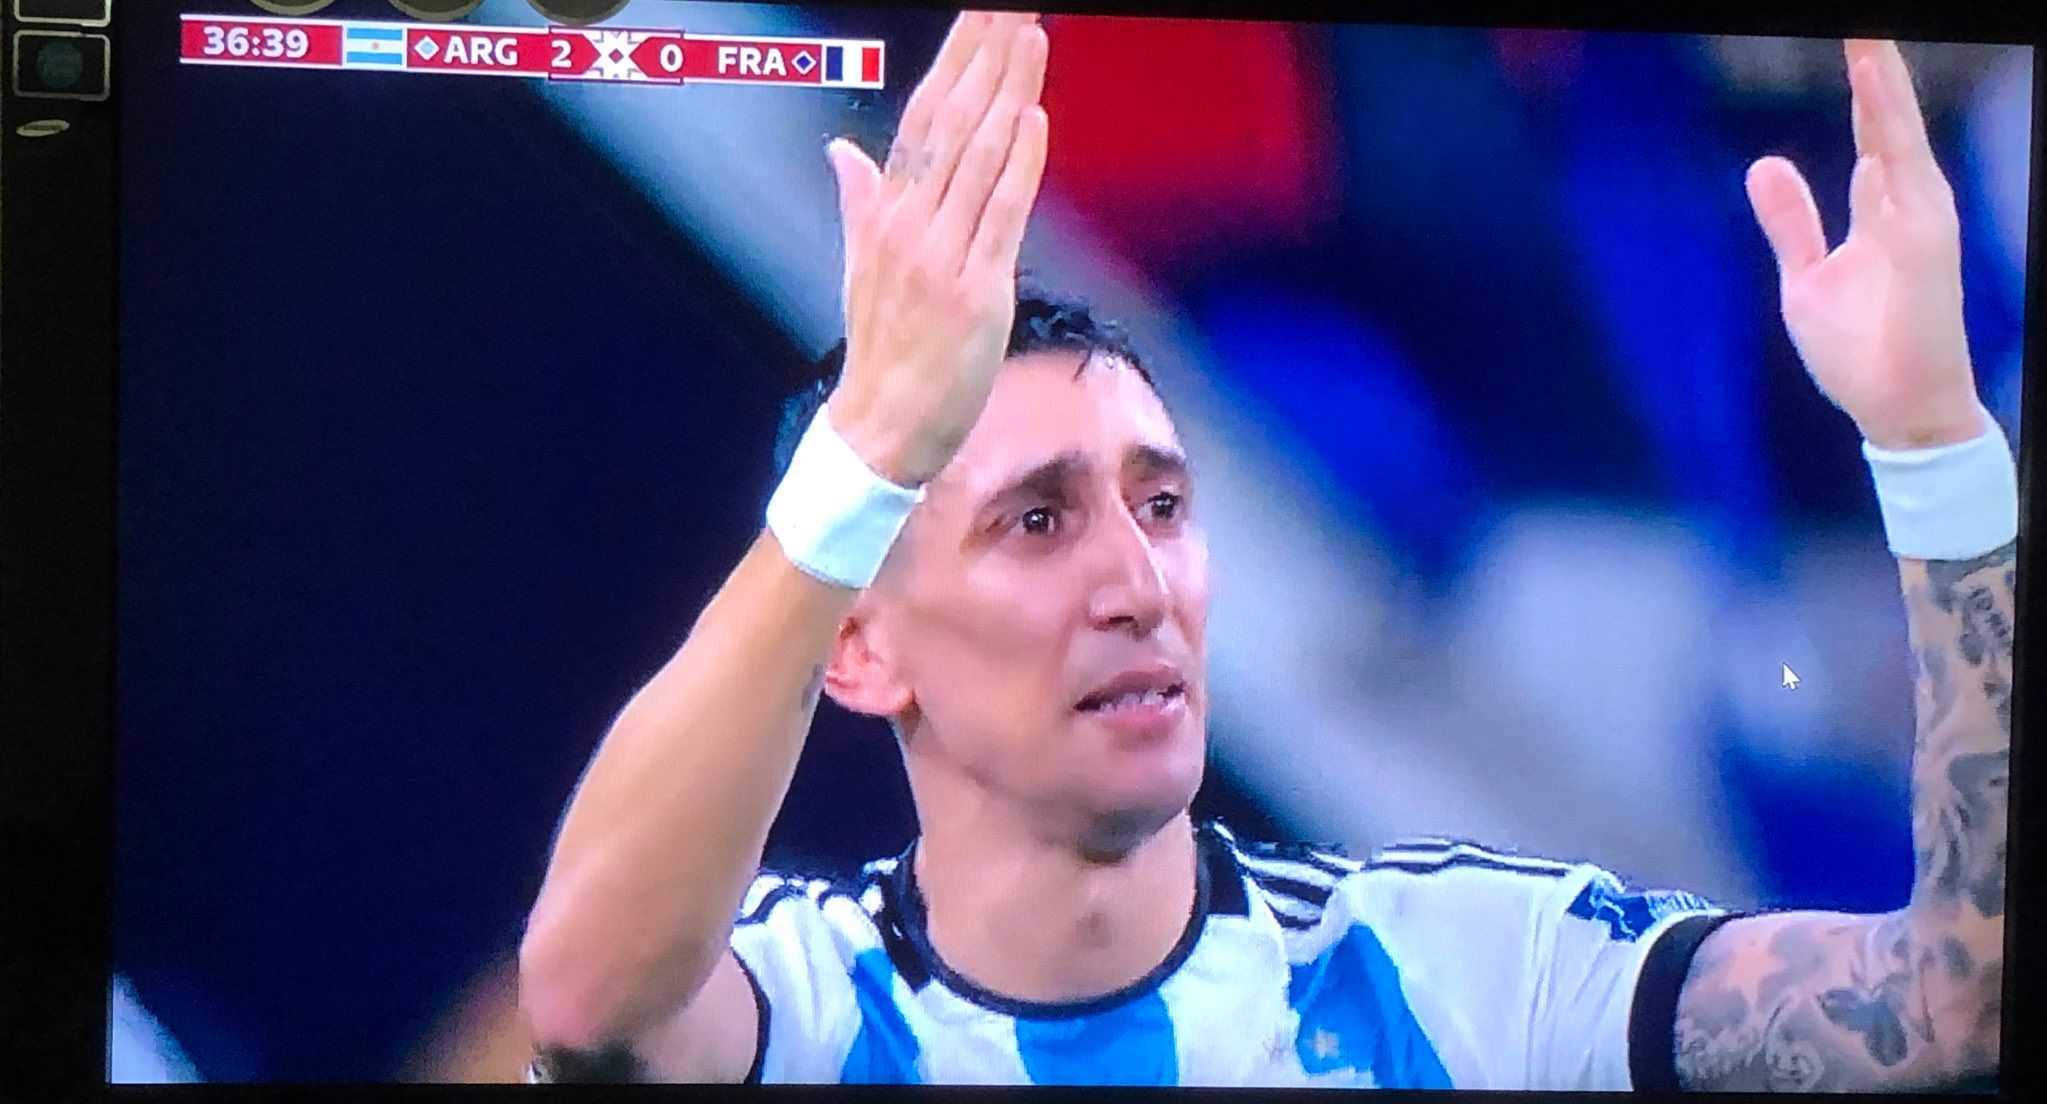 ngel Di Mara in tears after scoring second goal for Argentina vs France in 2022 FIFA World Cup final: Watch